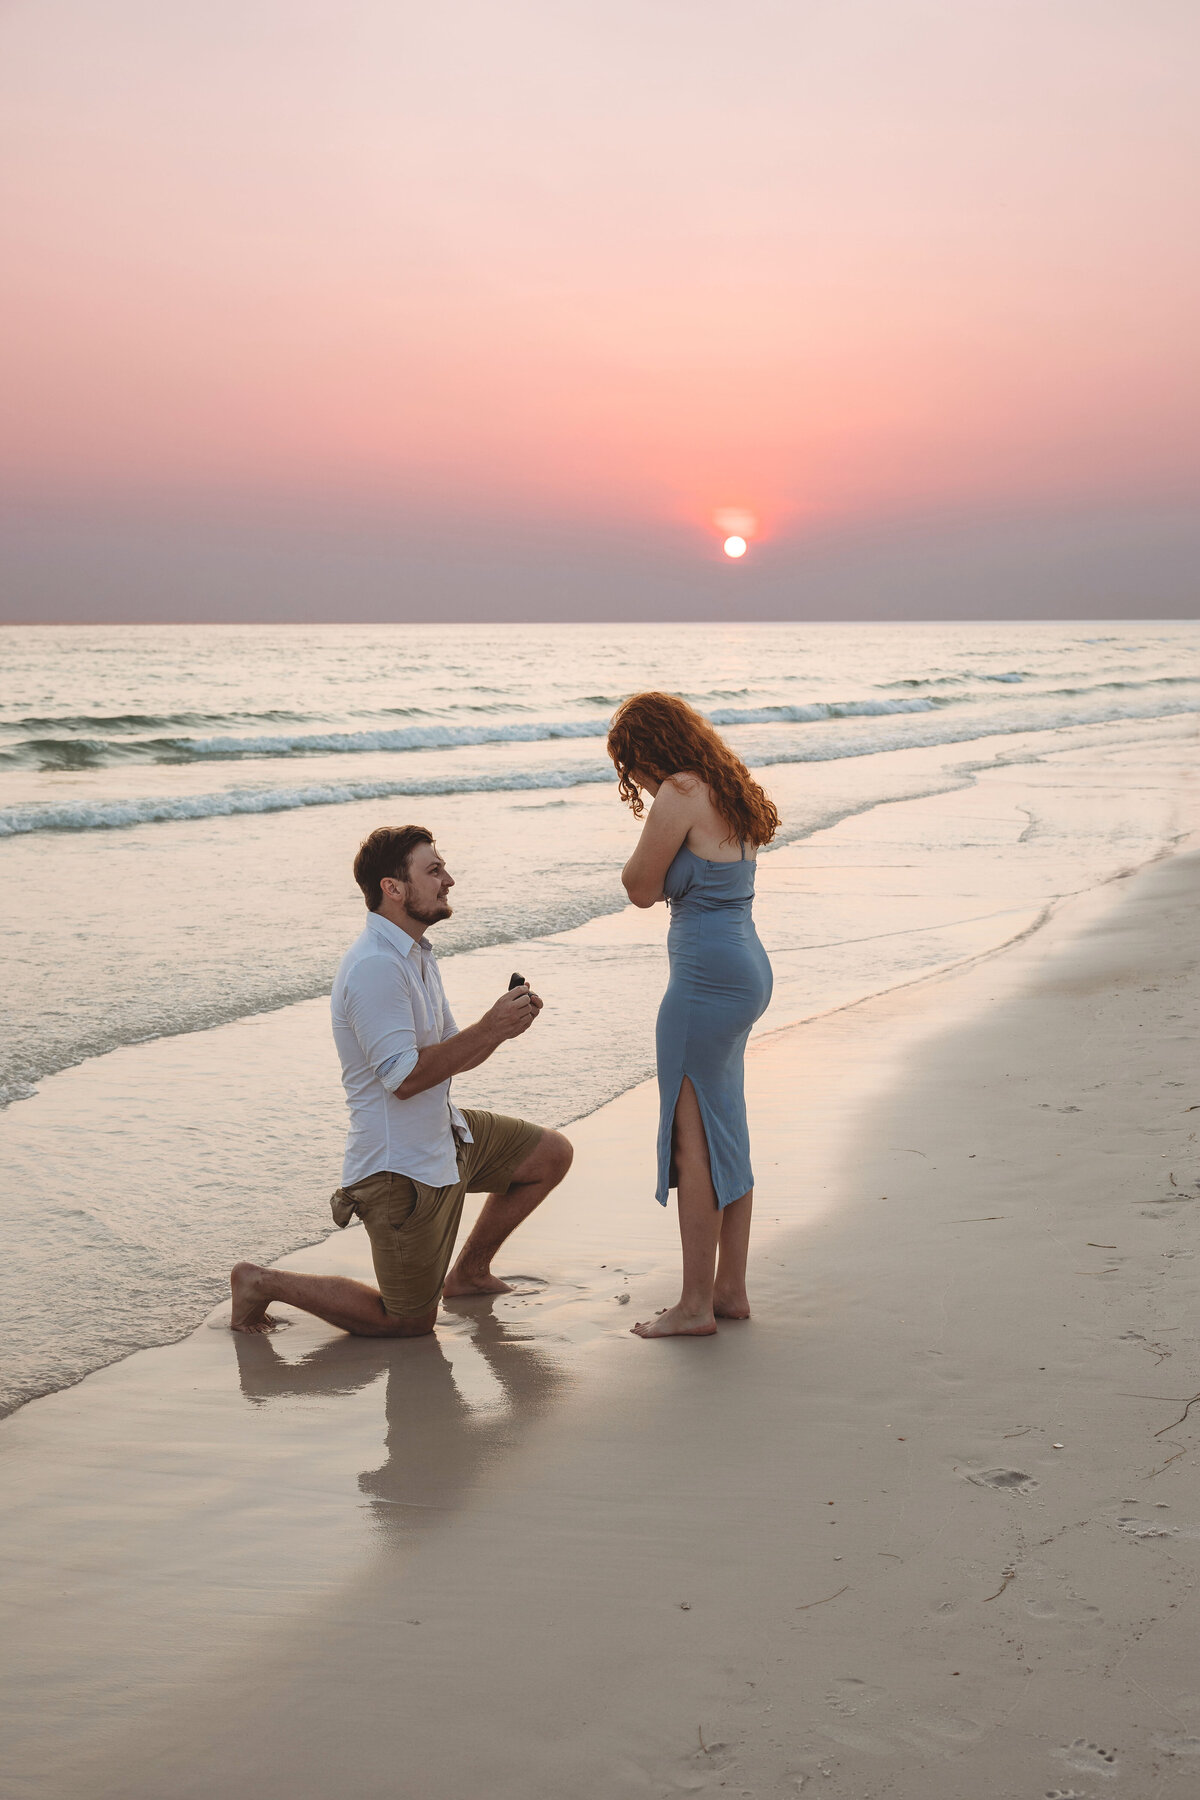 Man kneels down on  the beach at sunset holding a ring box. Redheaded girl in blue dress covers her mouth in surprise.